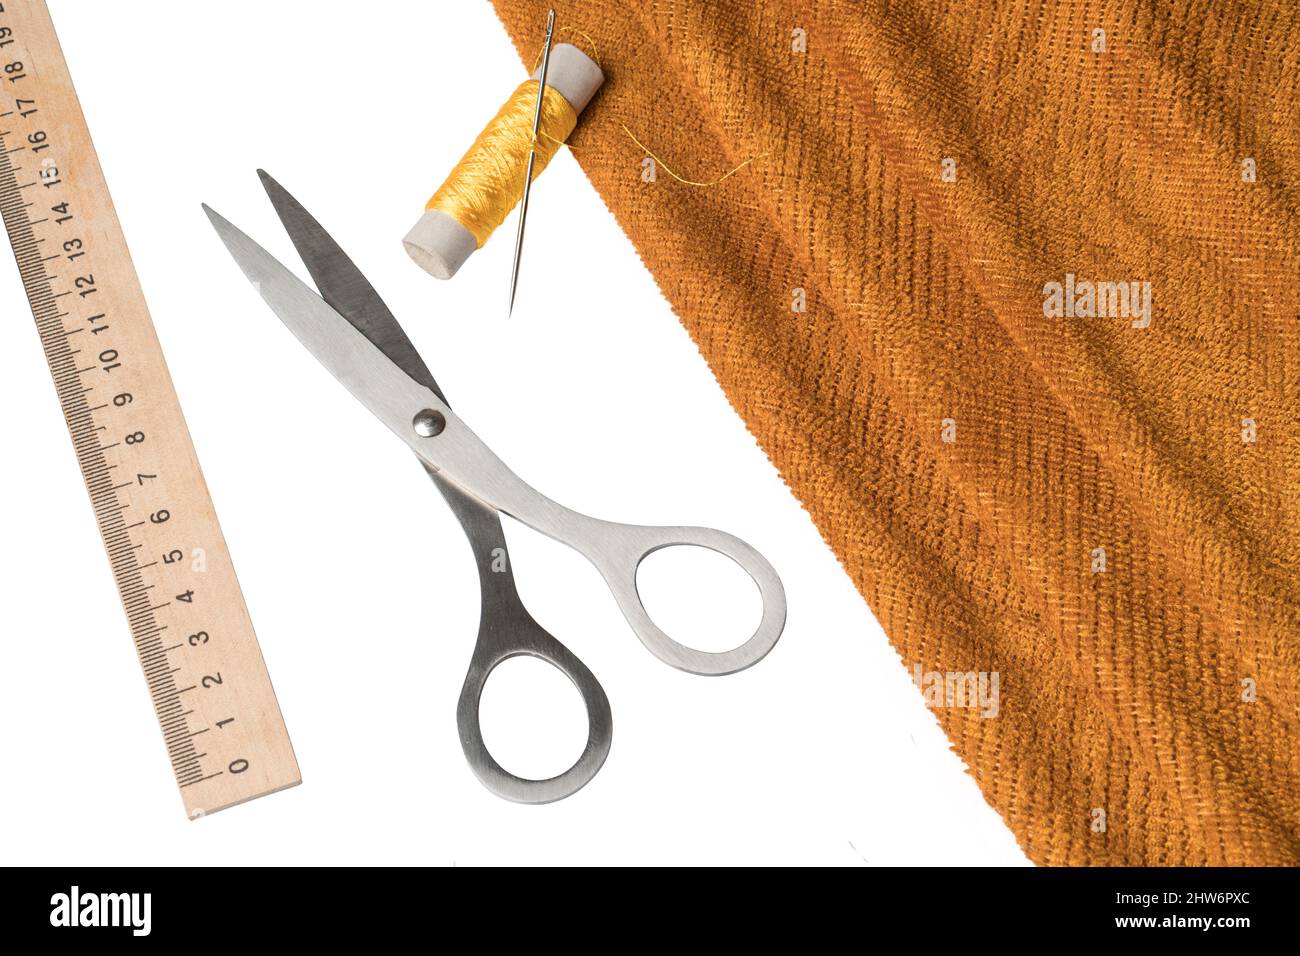 tools and material for sewing, thread, needle, scissors fabric Stock Photo